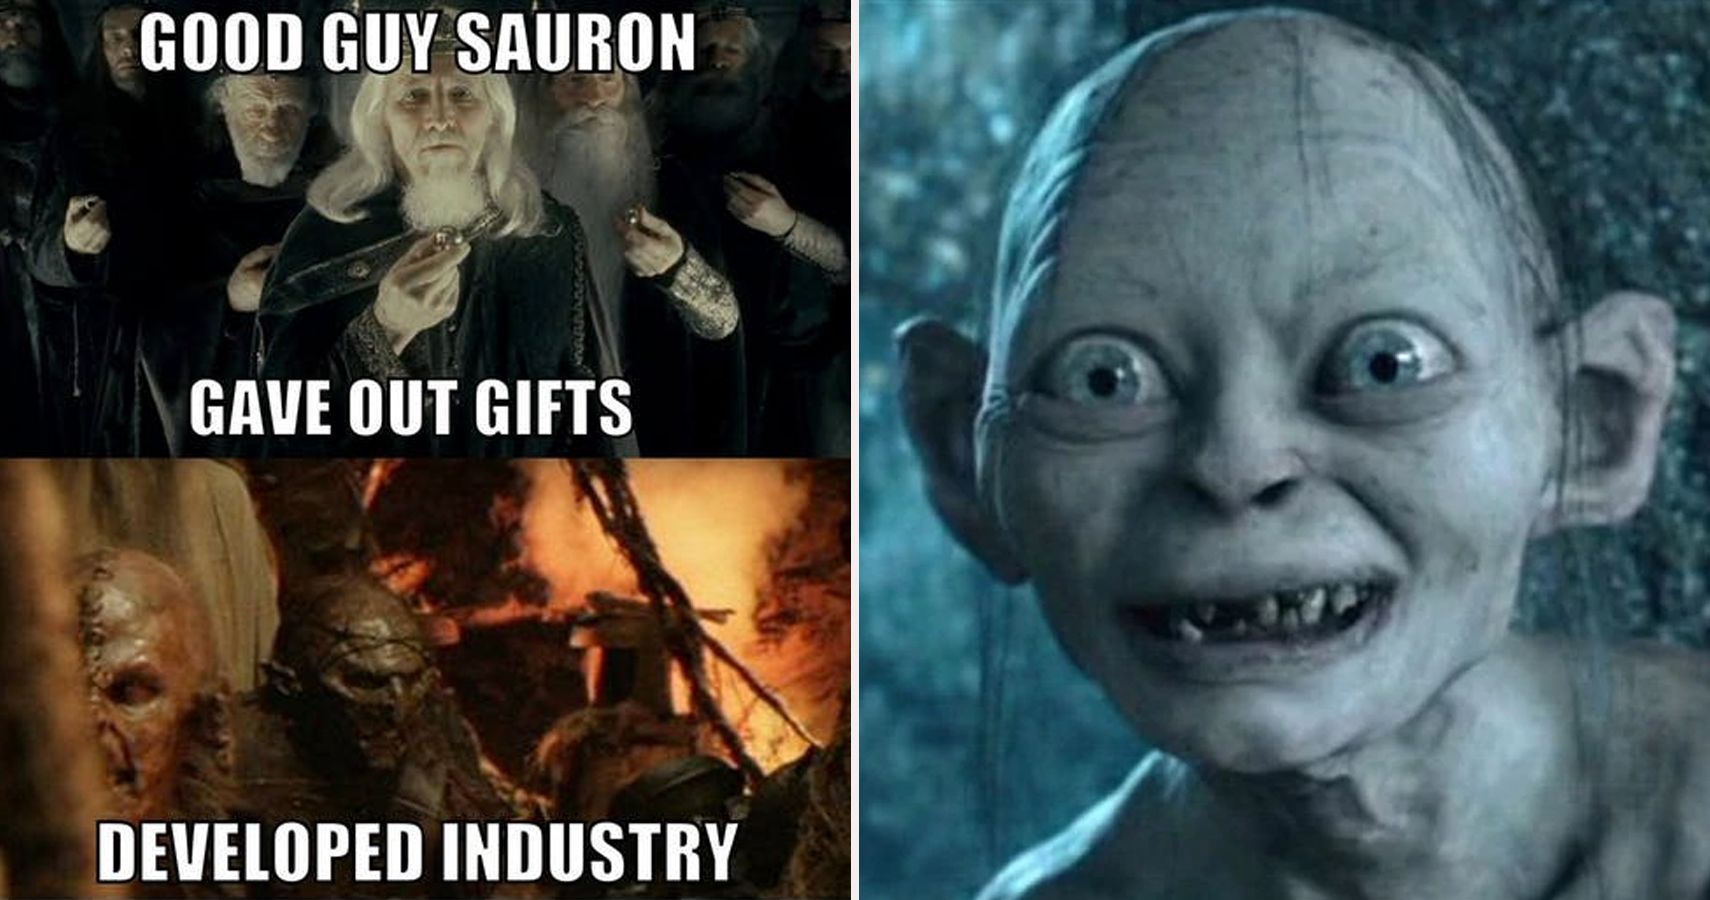 Renaissance Ervaren persoon spuiten 20 Hilarious Lord Of The Rings Memes That Change The Way We See The Movies